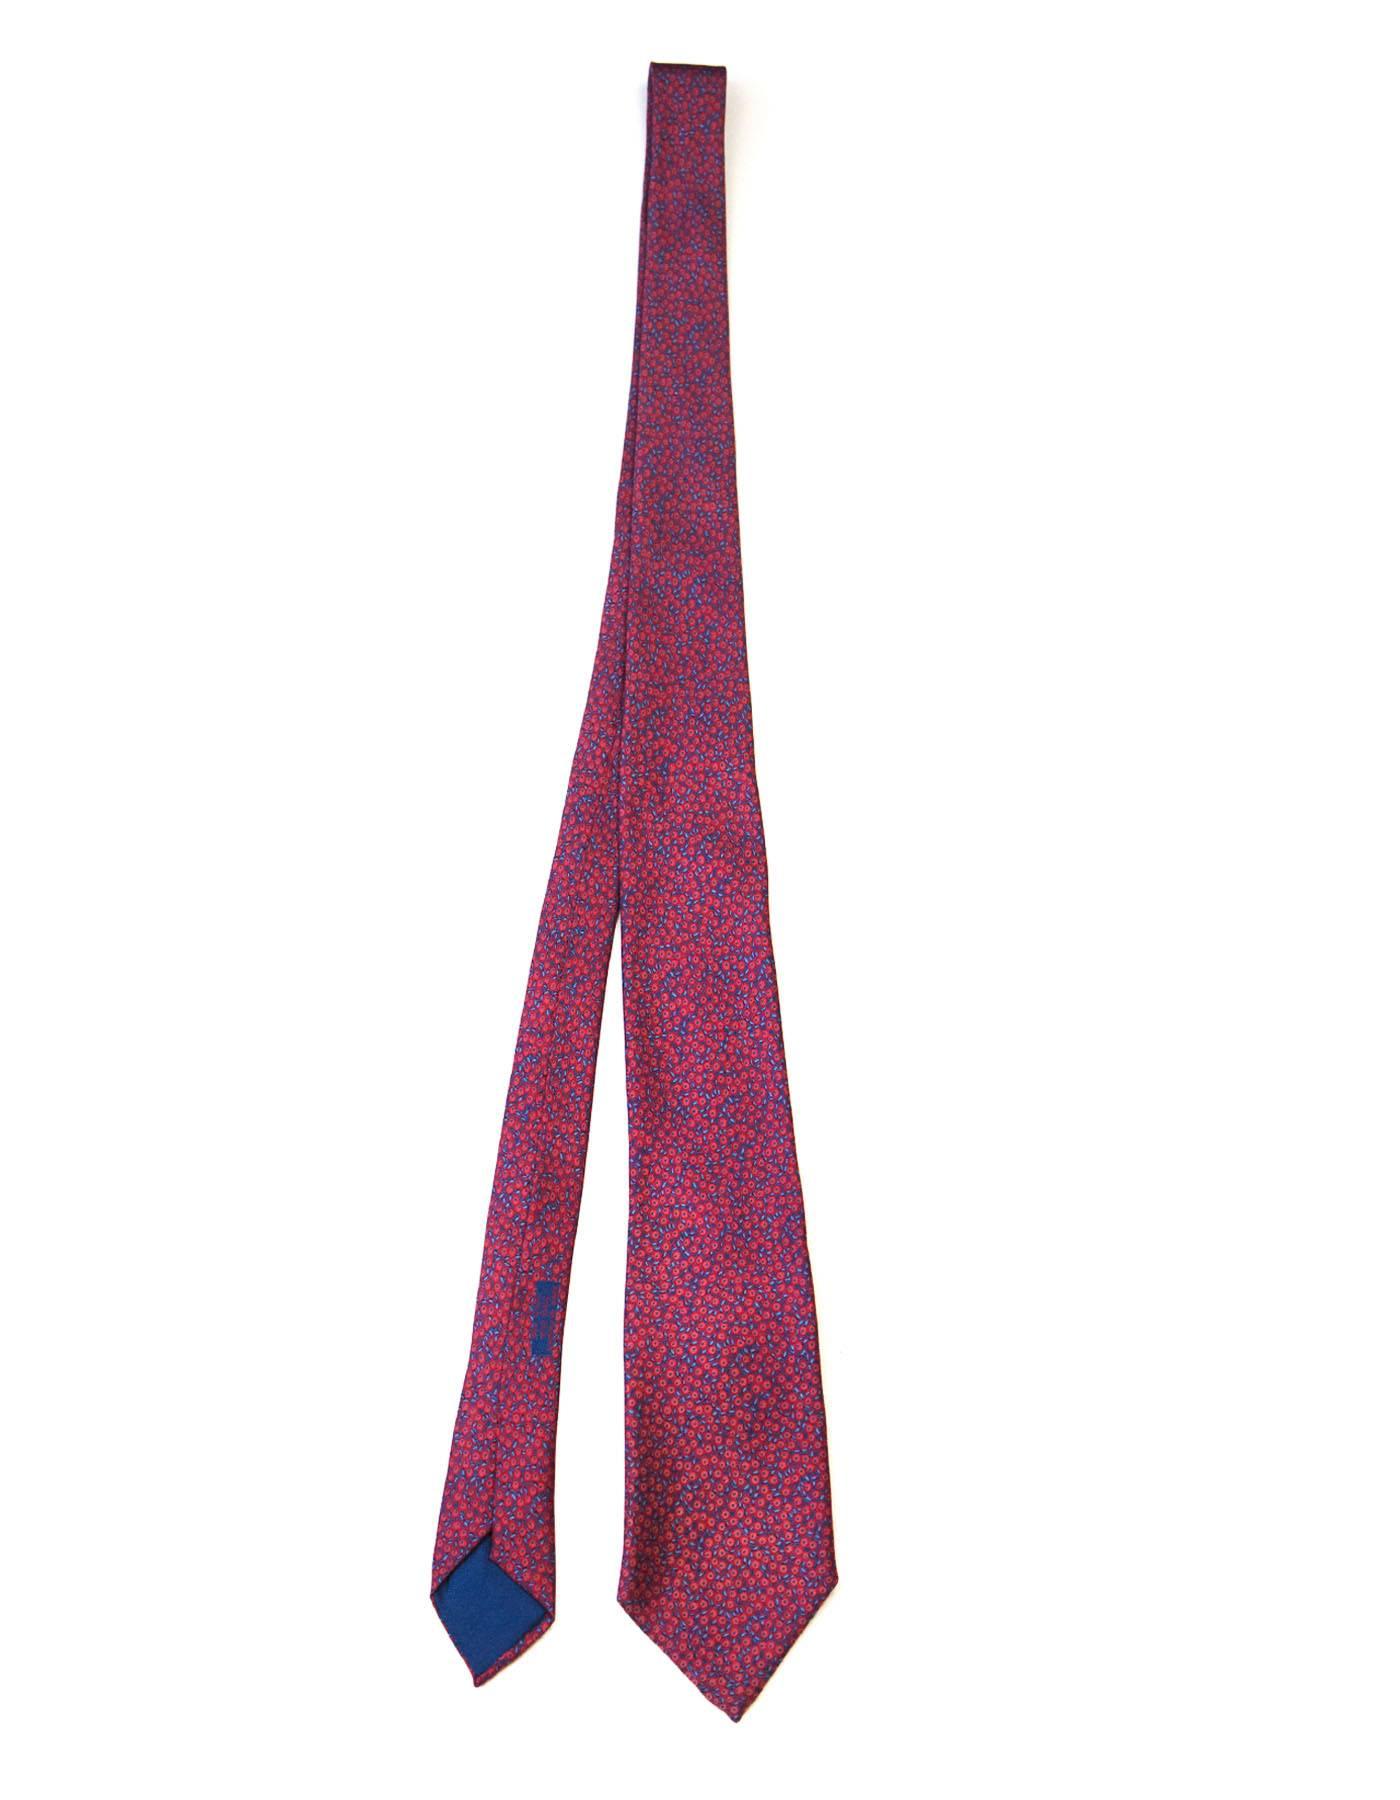 Hermes Red & Blue Dot Print Silk Tie

Made In: France
Color: Red and blue
Composition: 100% silk
Overall Condition: Excellent pre-owned condition
Measurements: 
Length: 57.5"
Width: 2"-3.5"